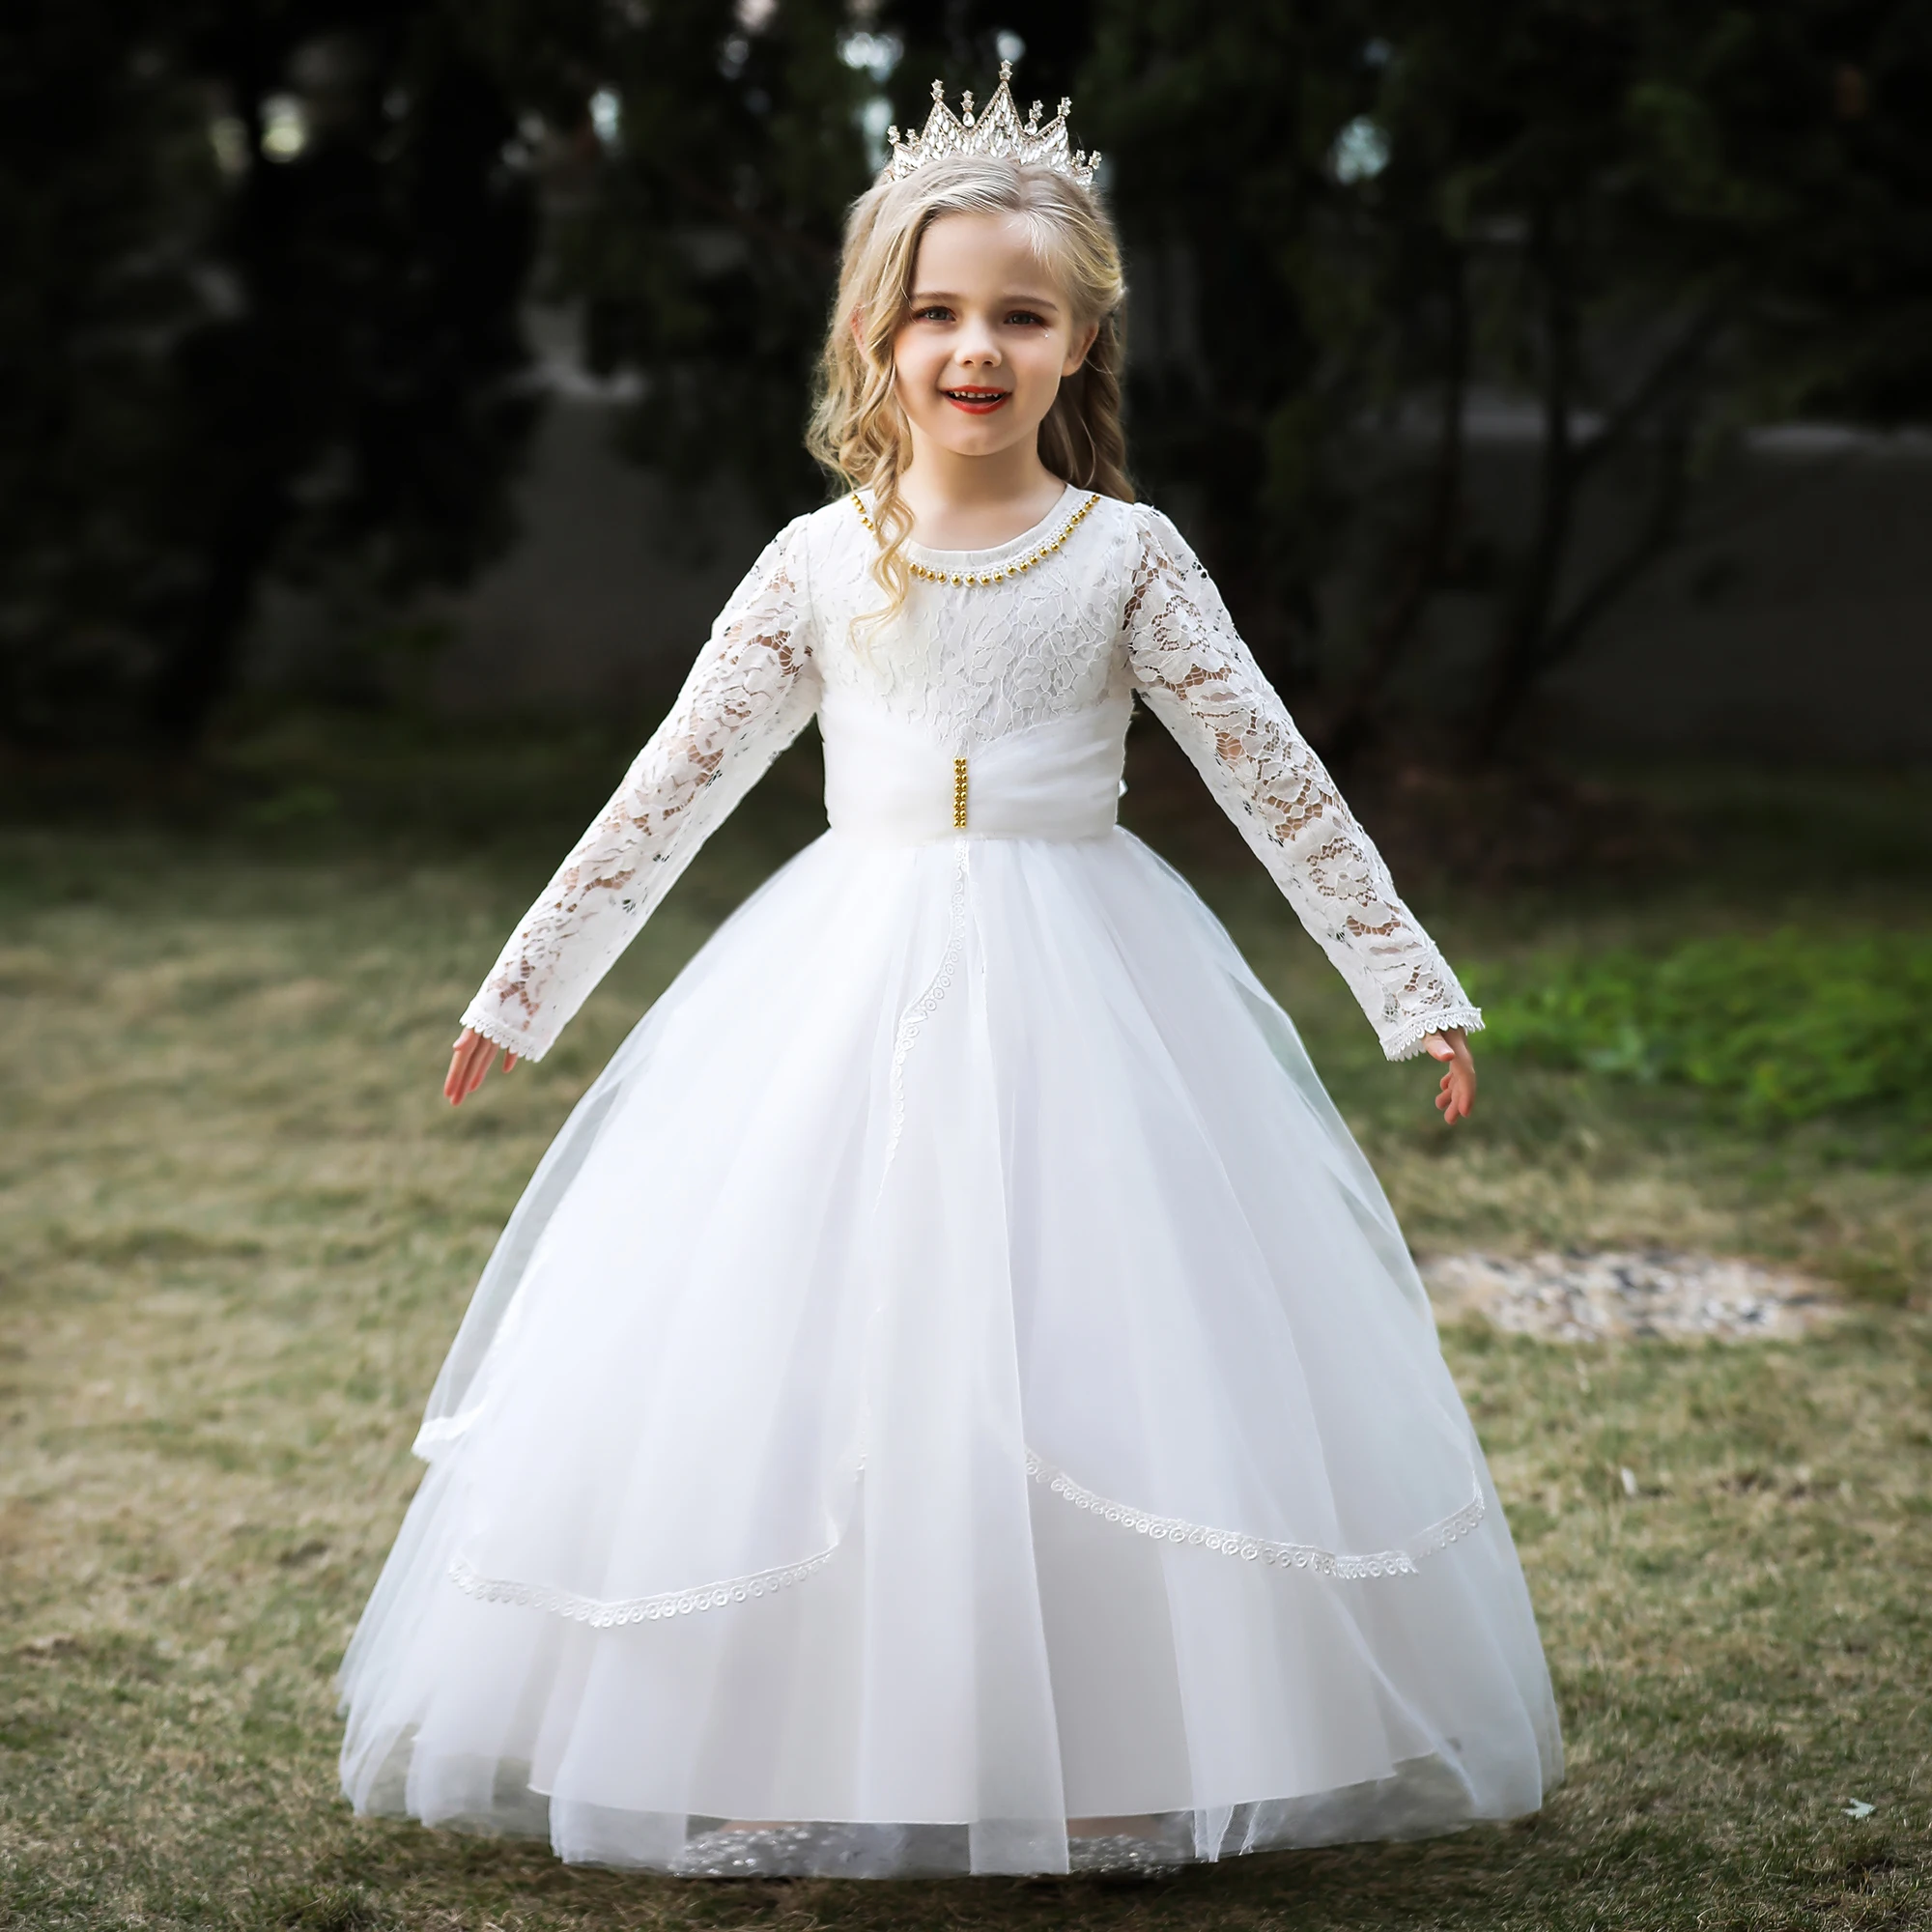 Flower Girl Dresses For Kids Luxury Princess White Satin Gown Long Sleeve  Illusion Lace With Bow Wedding Evening Party From Dh418623186, $70.2 |  DHgate.Com